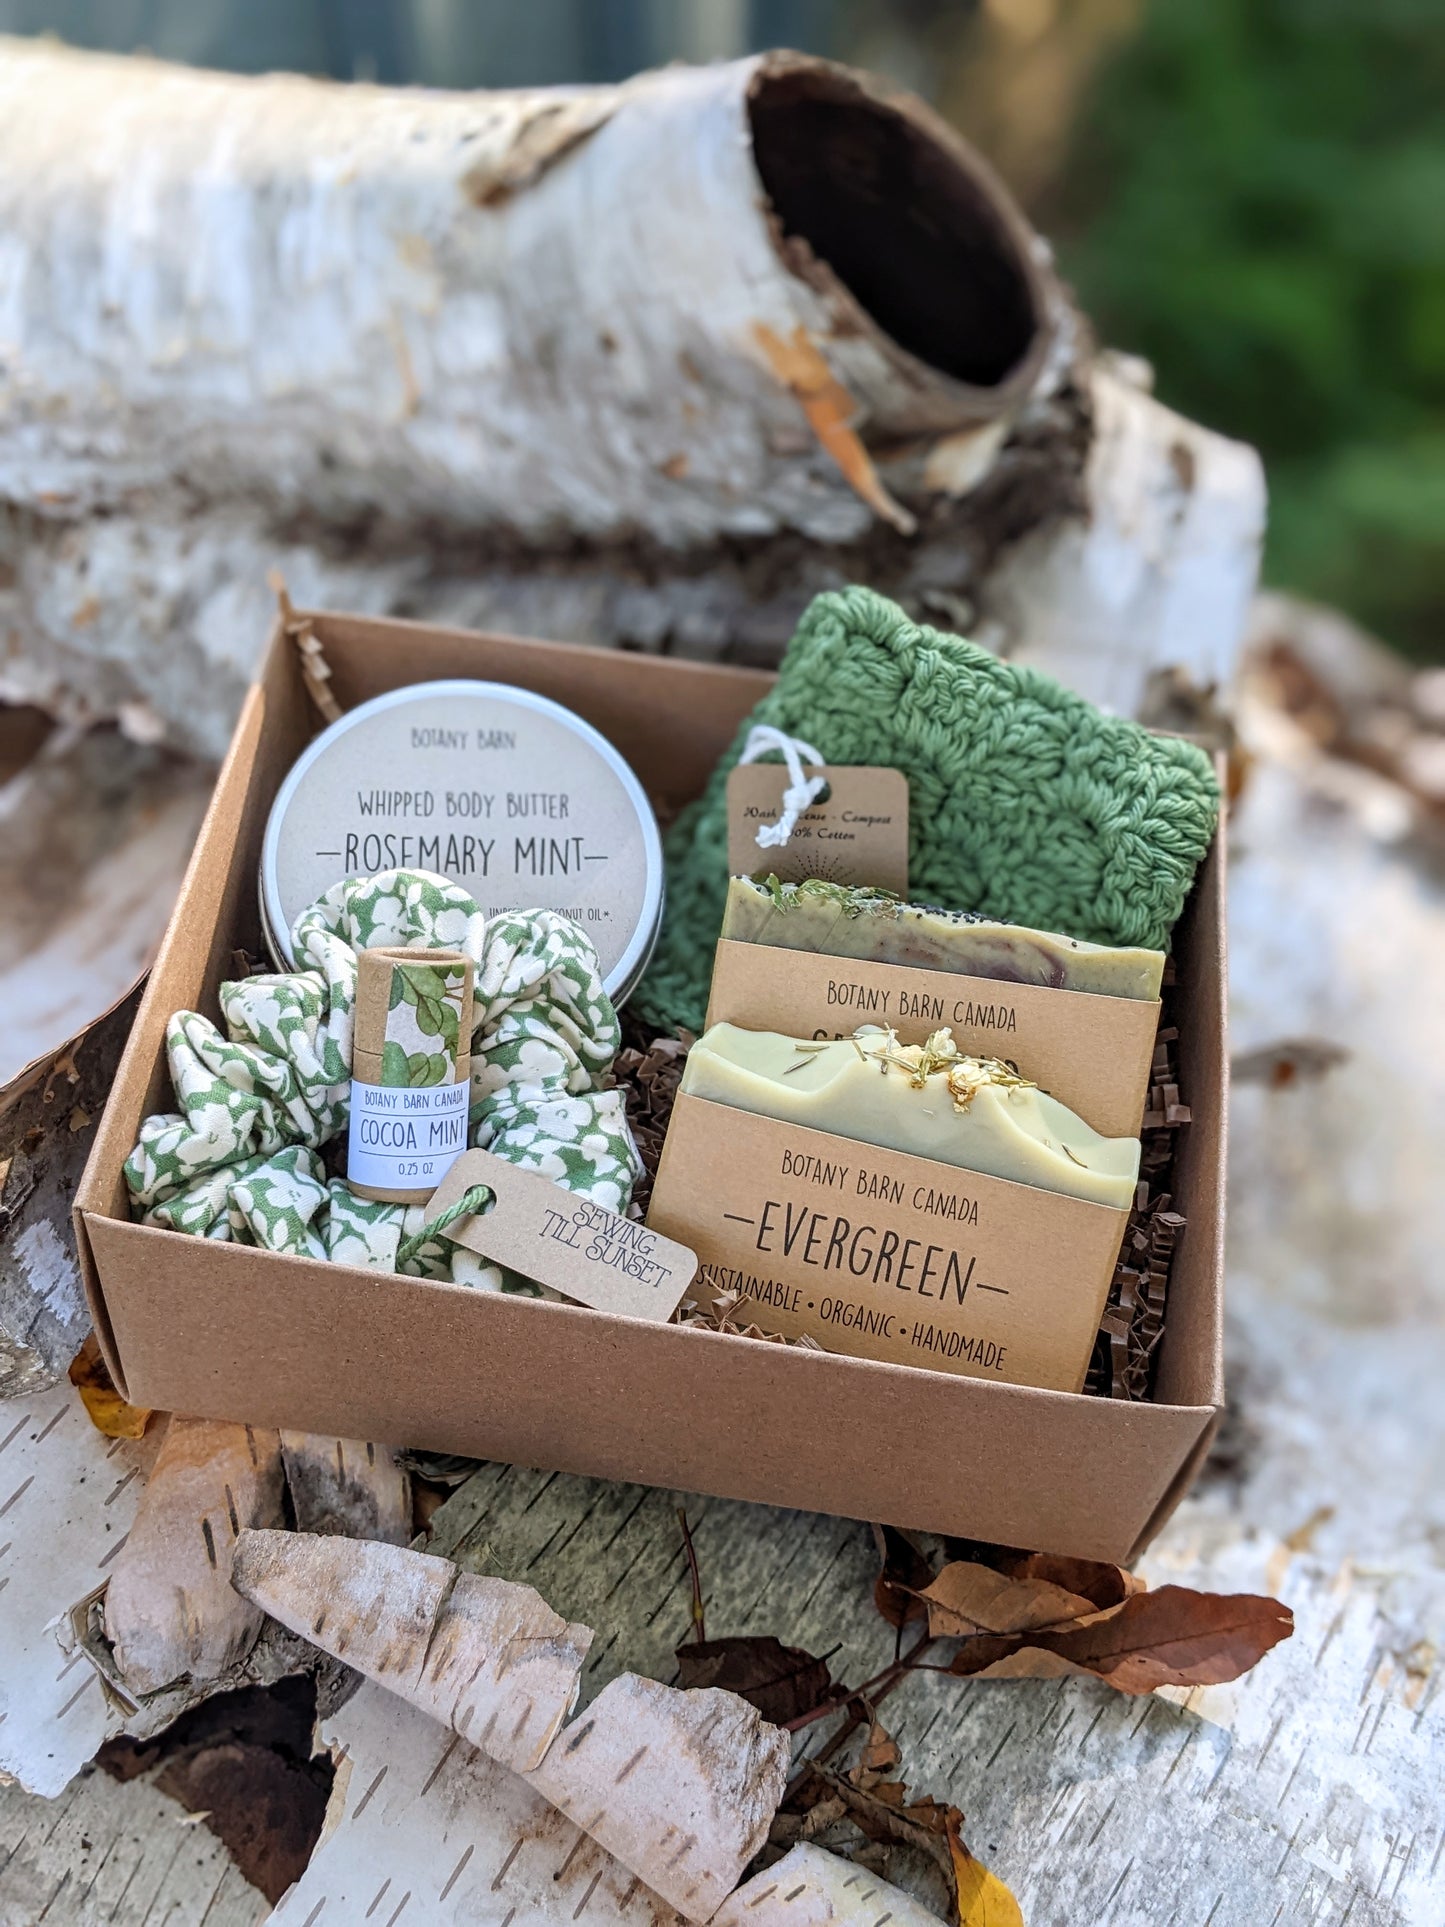 Woodsy Luxury Spa Kit - Holiday Gift Set with Organic Soaps and Crocheted Washcloth, Whipped Body Butter, Handmade Scrunchie & Lip Balm